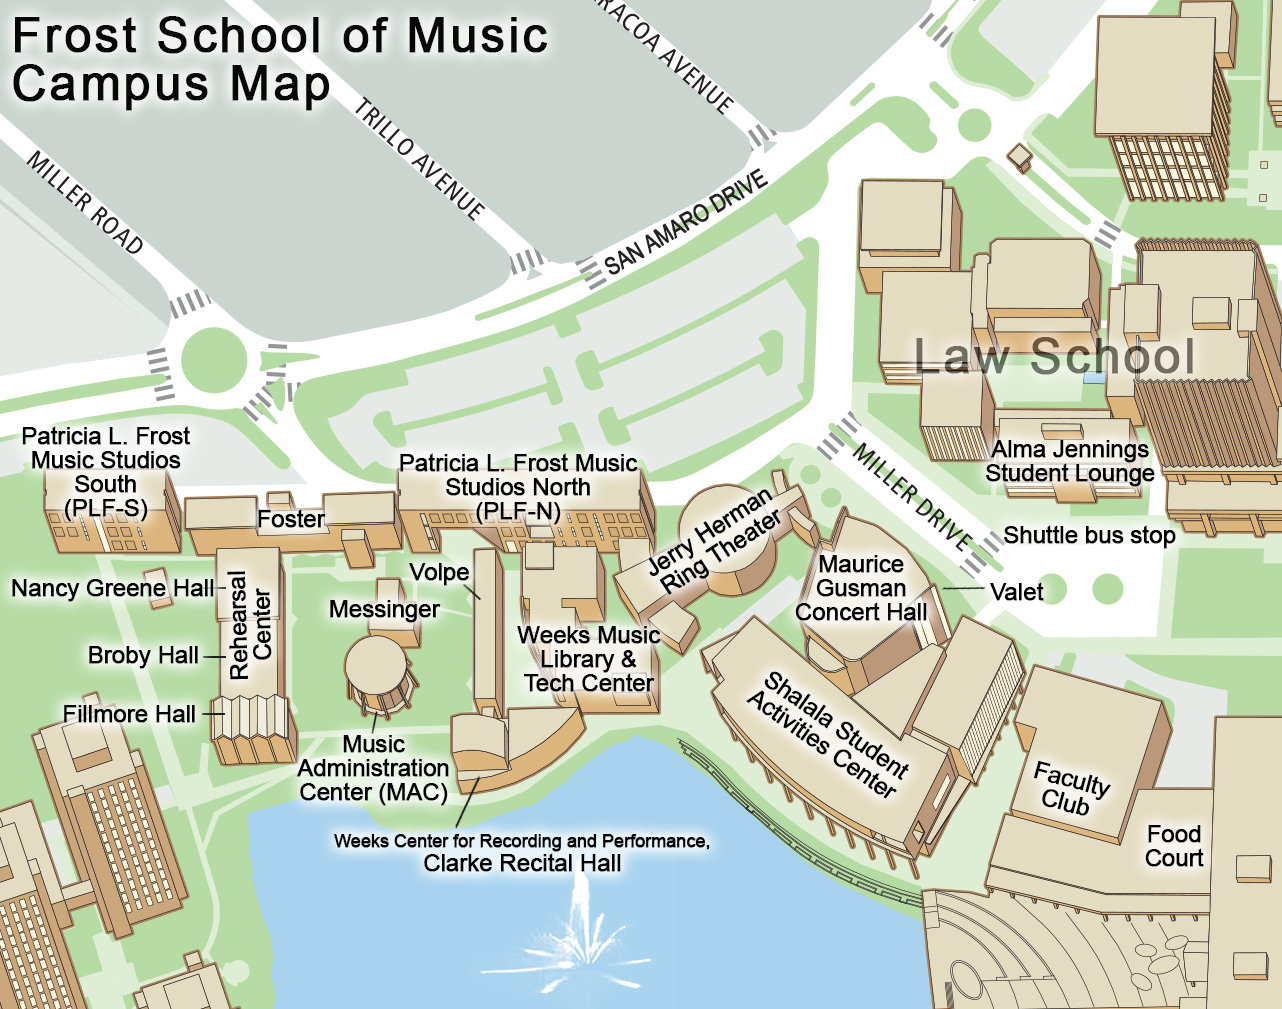 Map of the Frost specific Buildings at UM